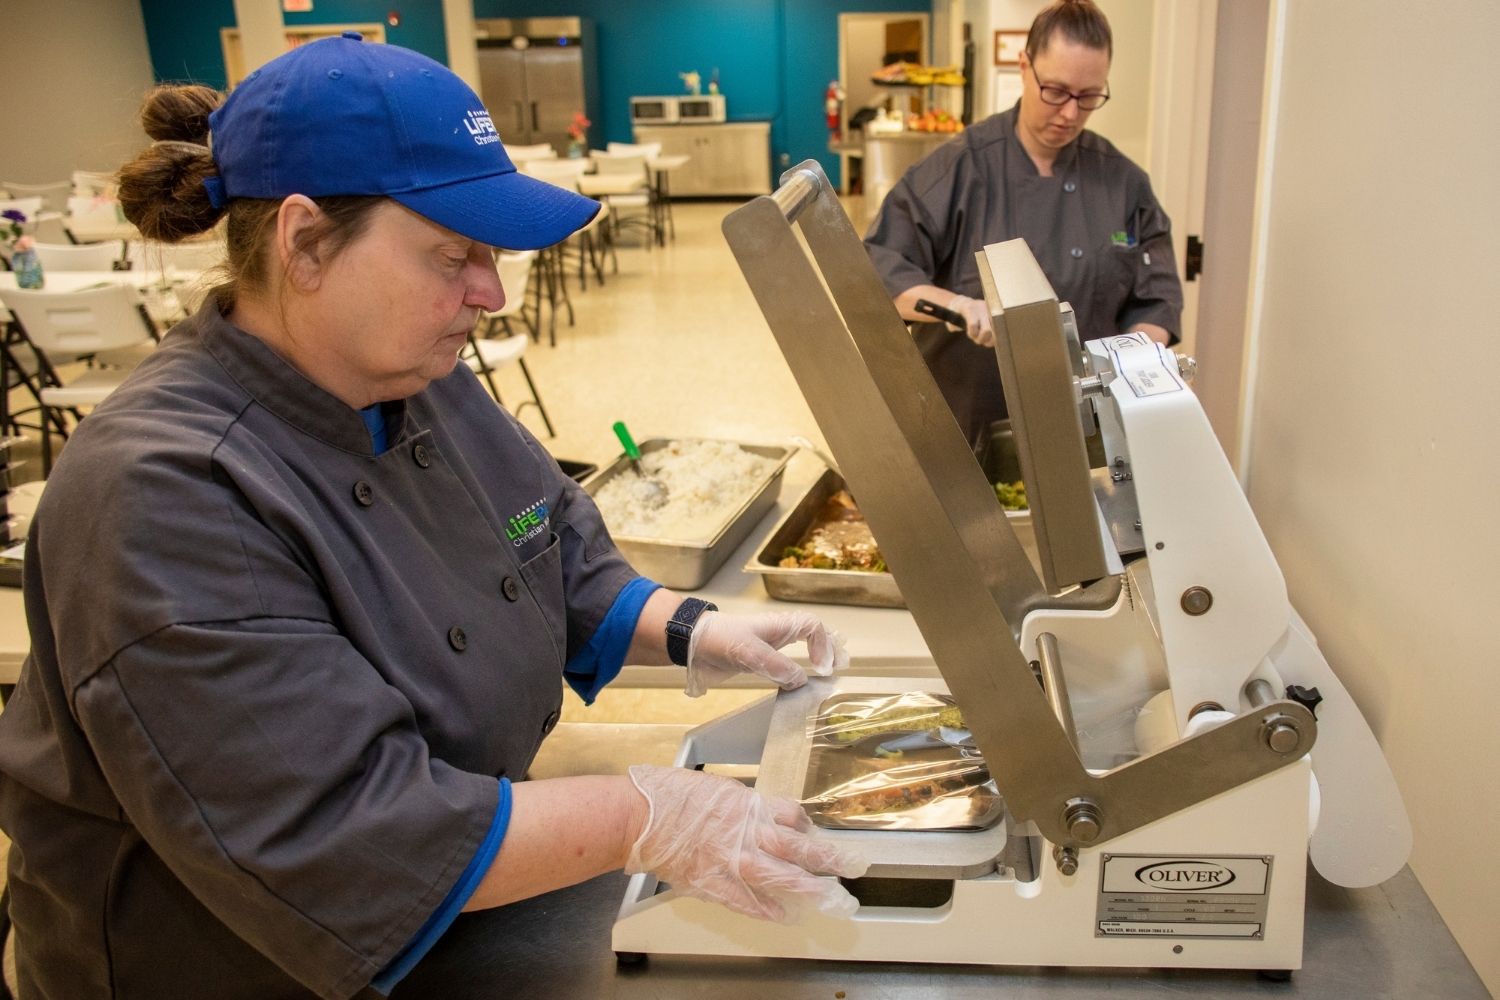 LifePath’s new meal packaging system opens doors to helping families